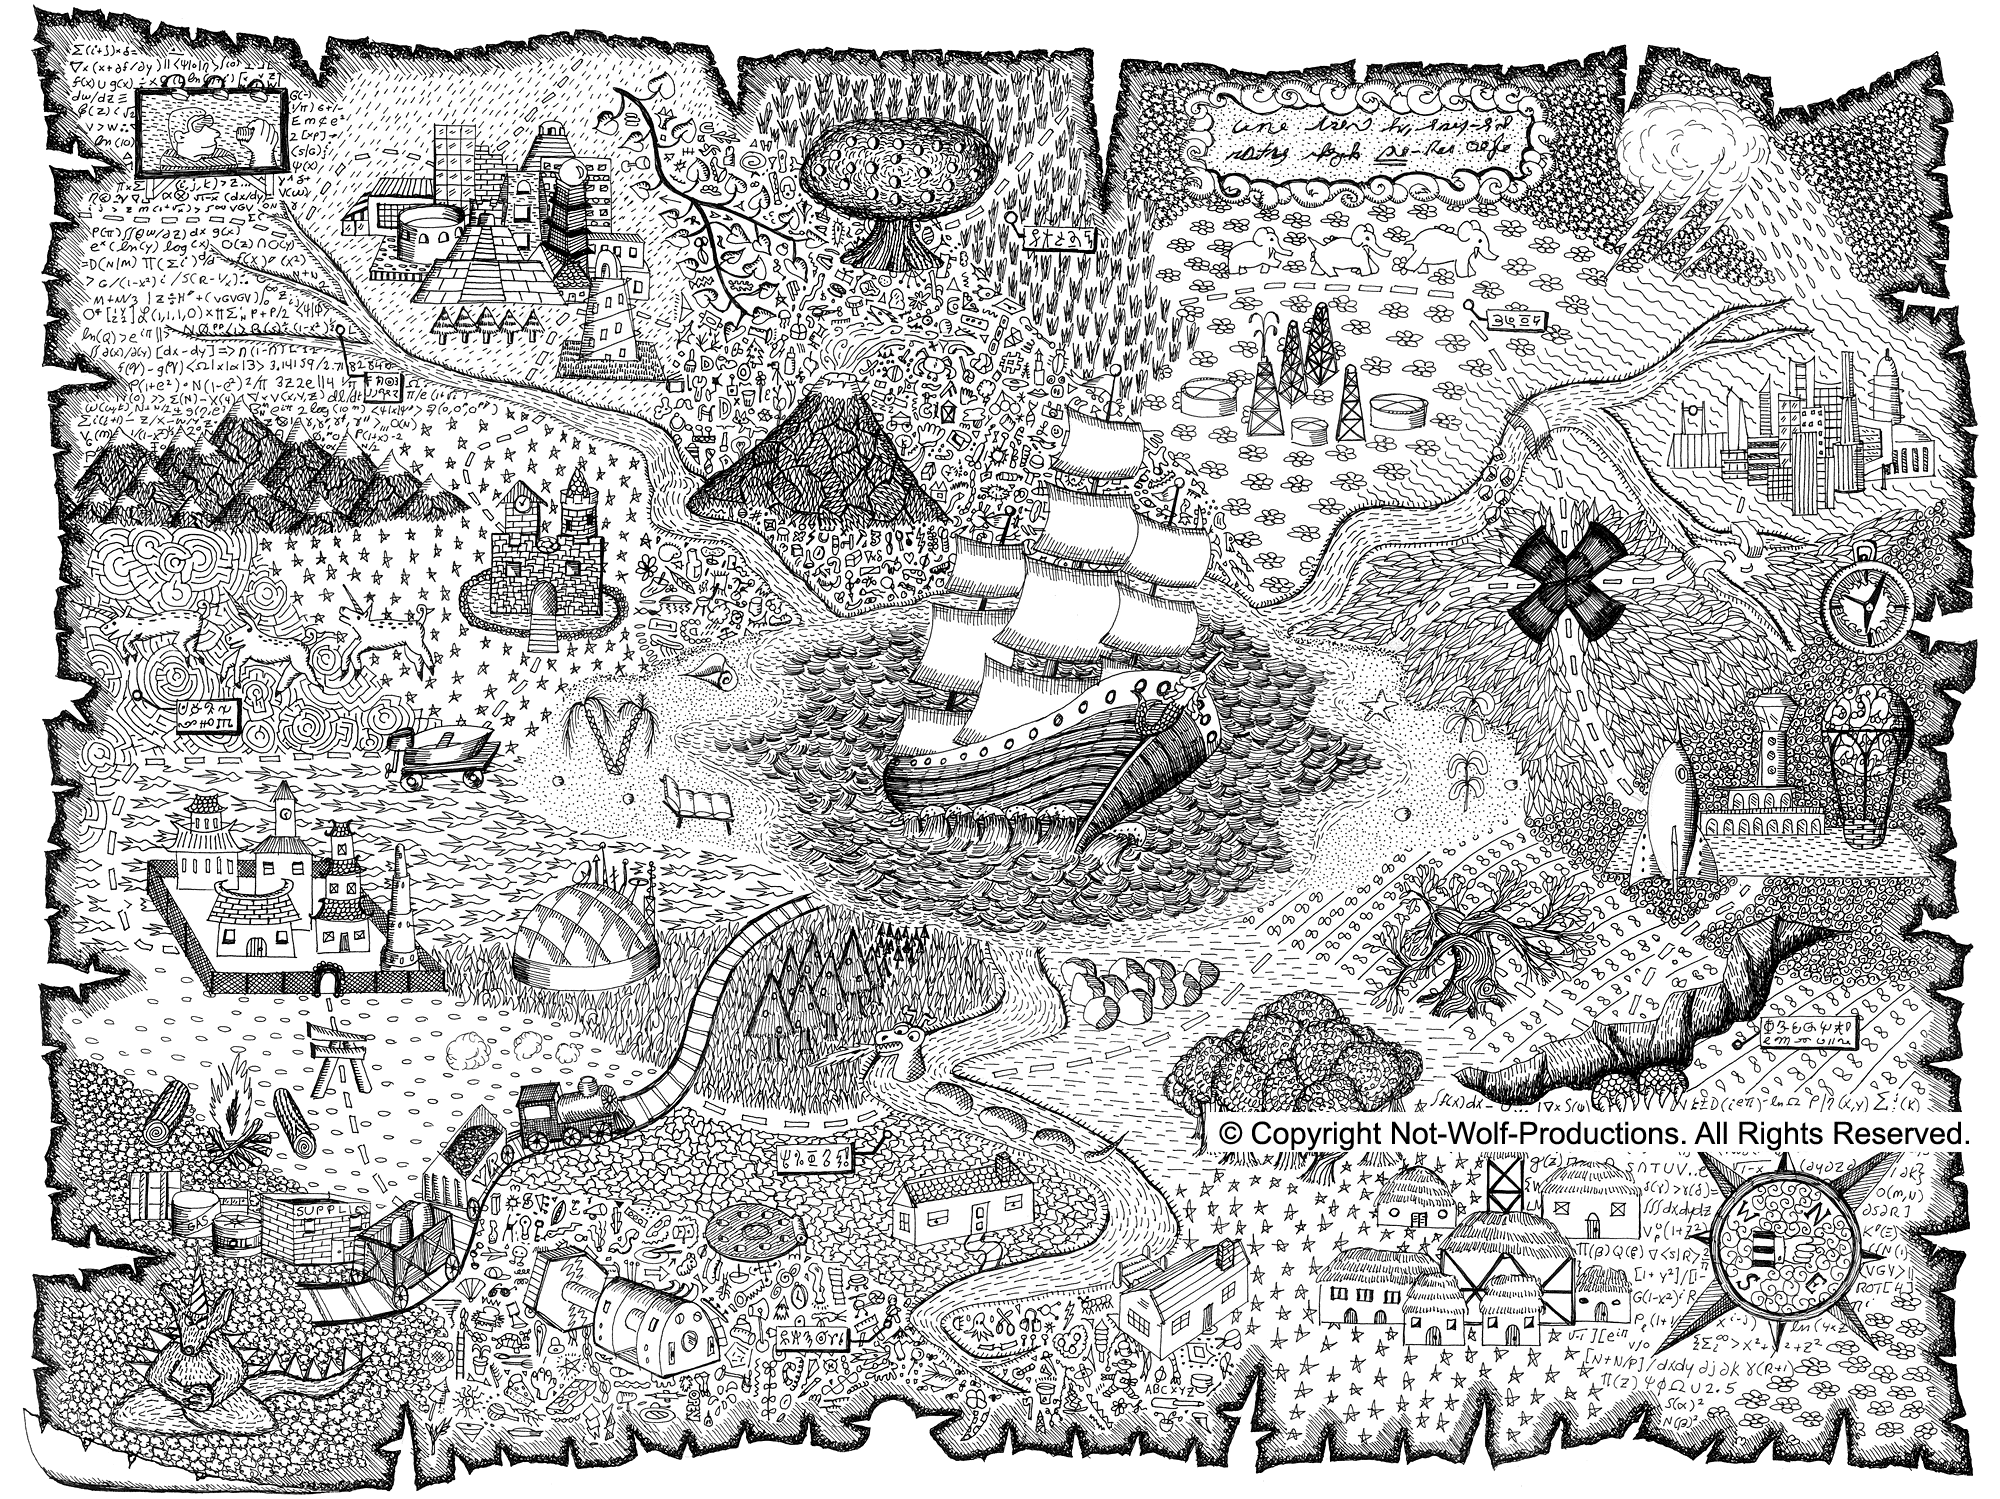 Childrens Treasure Map Coloring Page